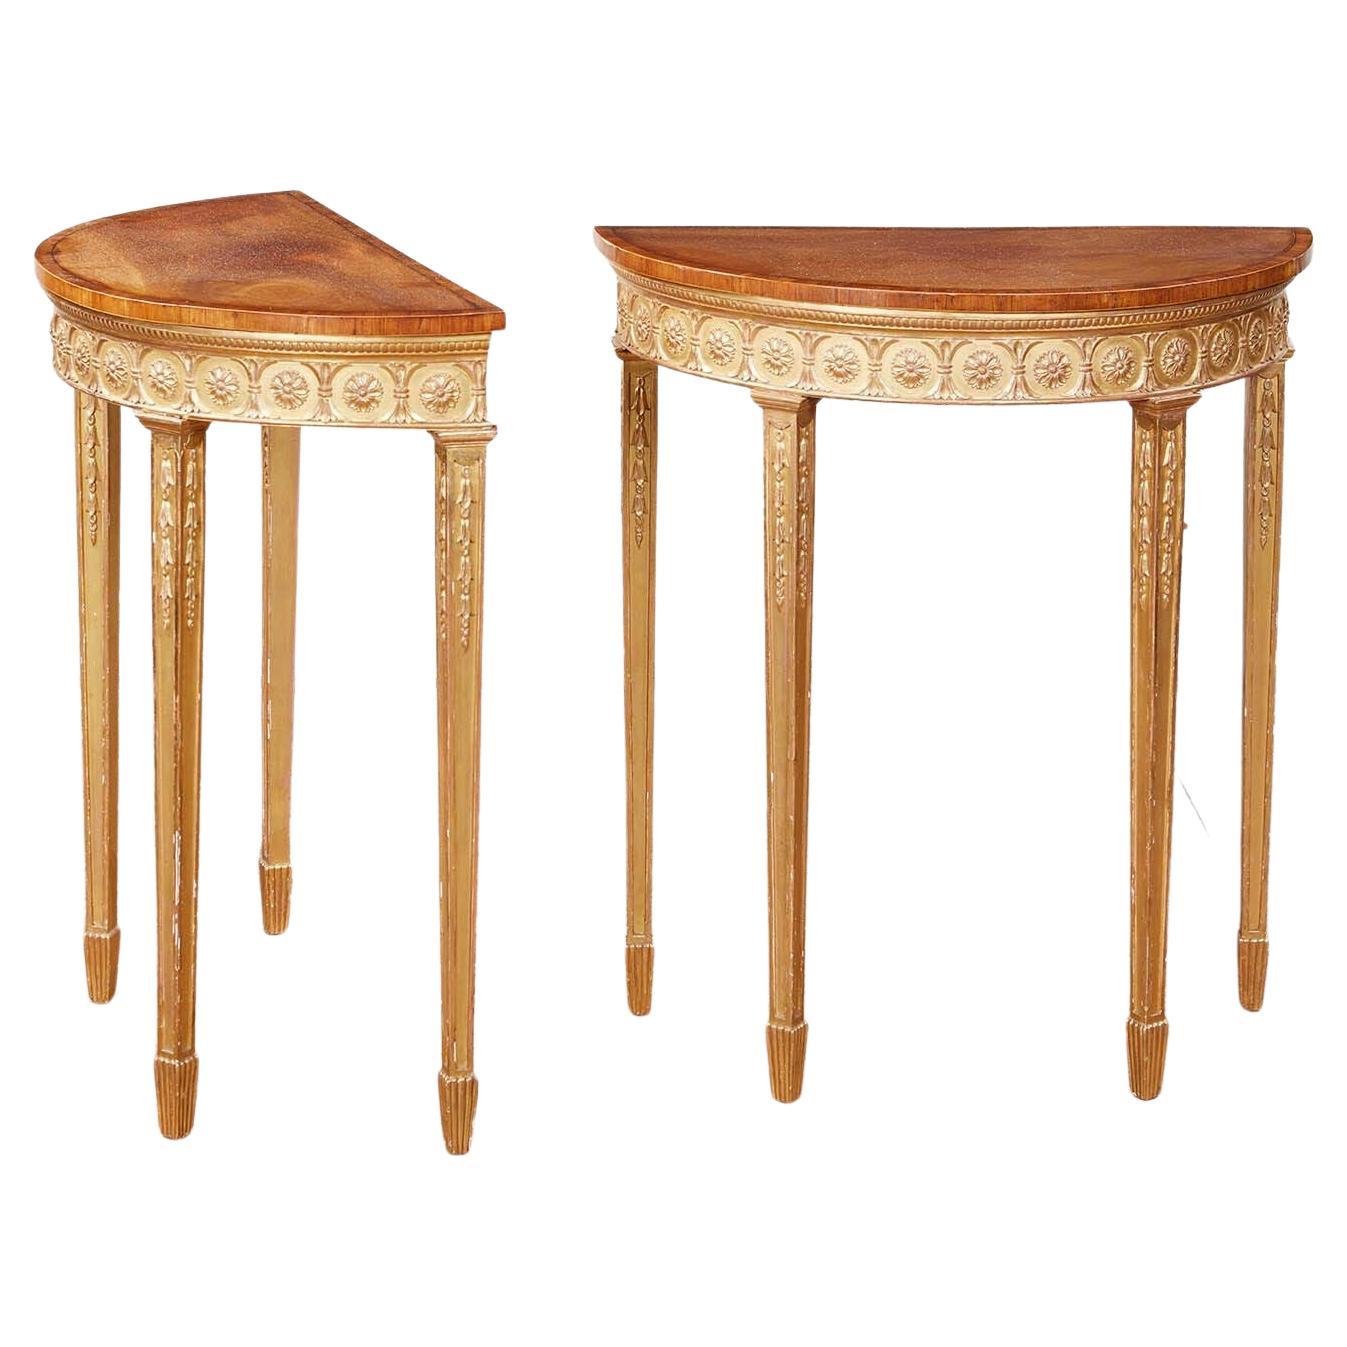 Pair of George III Giltwood and Mahogany Console Tables